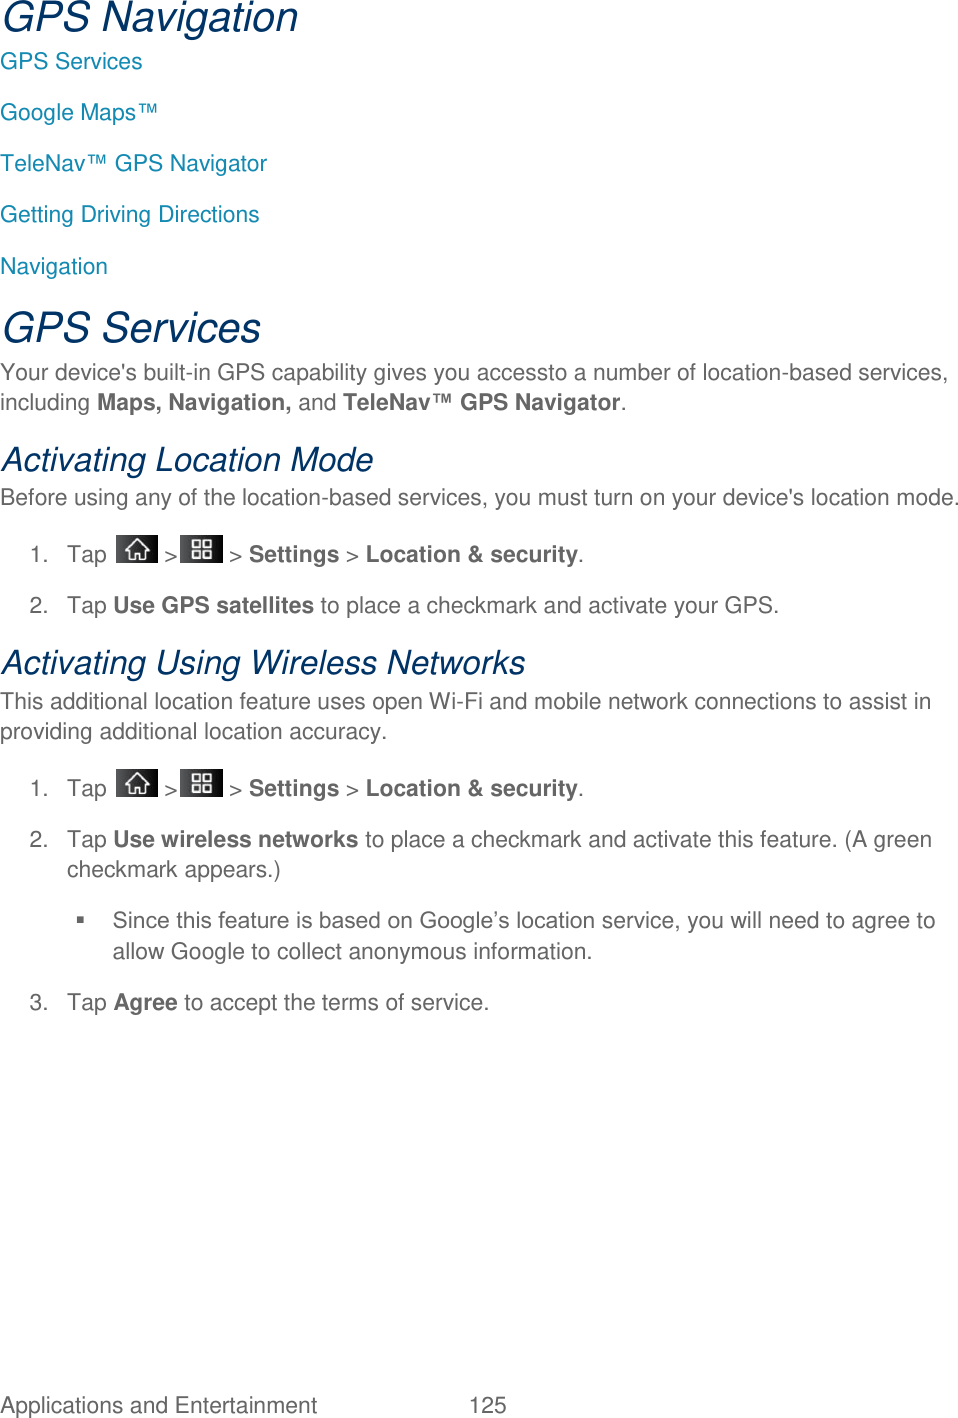 Applications and Entertainment  125 GPS Navigation GPS Services  Google Maps™ TeleNav™ GPS Navigator Getting Driving Directions  Navigation GPS Services Your device&apos;s built-in GPS capability gives you accessto a number of location-based services, including Maps, Navigation, and TeleNav™ GPS Navigator. Activating Location Mode Before using any of the location-based services, you must turn on your device&apos;s location mode. 1.  Tap   &gt;  &gt; Settings &gt; Location &amp; security. 2.  Tap Use GPS satellites to place a checkmark and activate your GPS. Activating Using Wireless Networks This additional location feature uses open Wi-Fi and mobile network connections to assist in providing additional location accuracy. 1.  Tap   &gt;  &gt; Settings &gt; Location &amp; security. 2.  Tap Use wireless networks to place a checkmark and activate this feature. (A green checkmark appears.)   Since this feature is based on Google‘s location service, you will need to agree to allow Google to collect anonymous information. 3.  Tap Agree to accept the terms of service.   